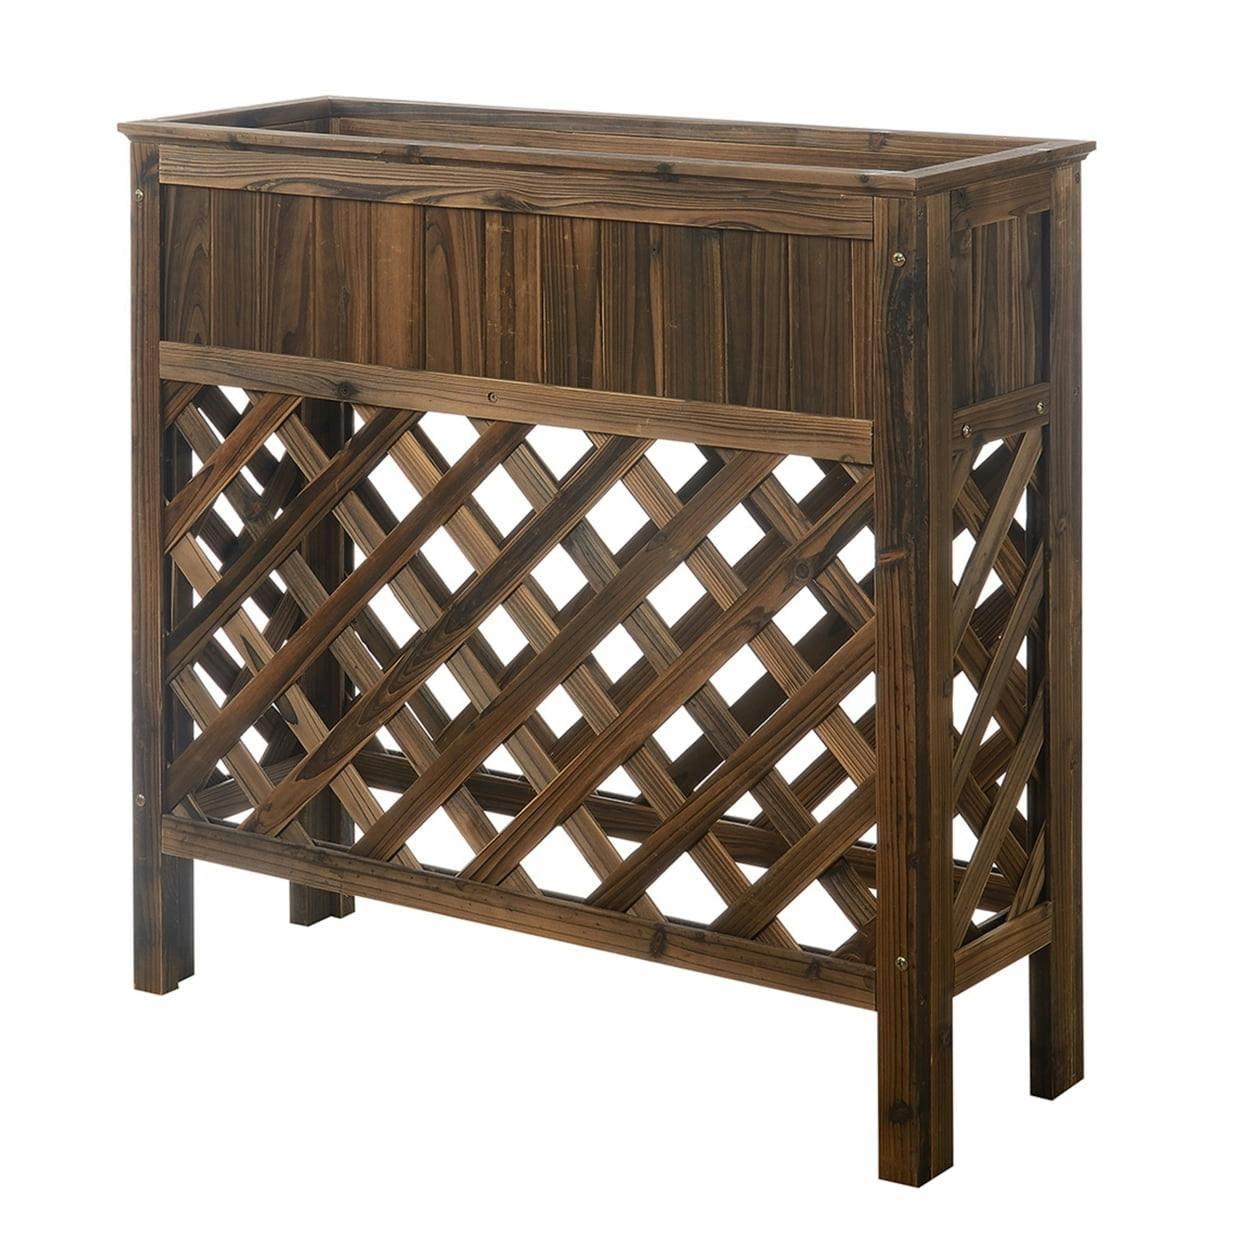 Weathered Cedar Elevated Garden Planter for Patio and Deck